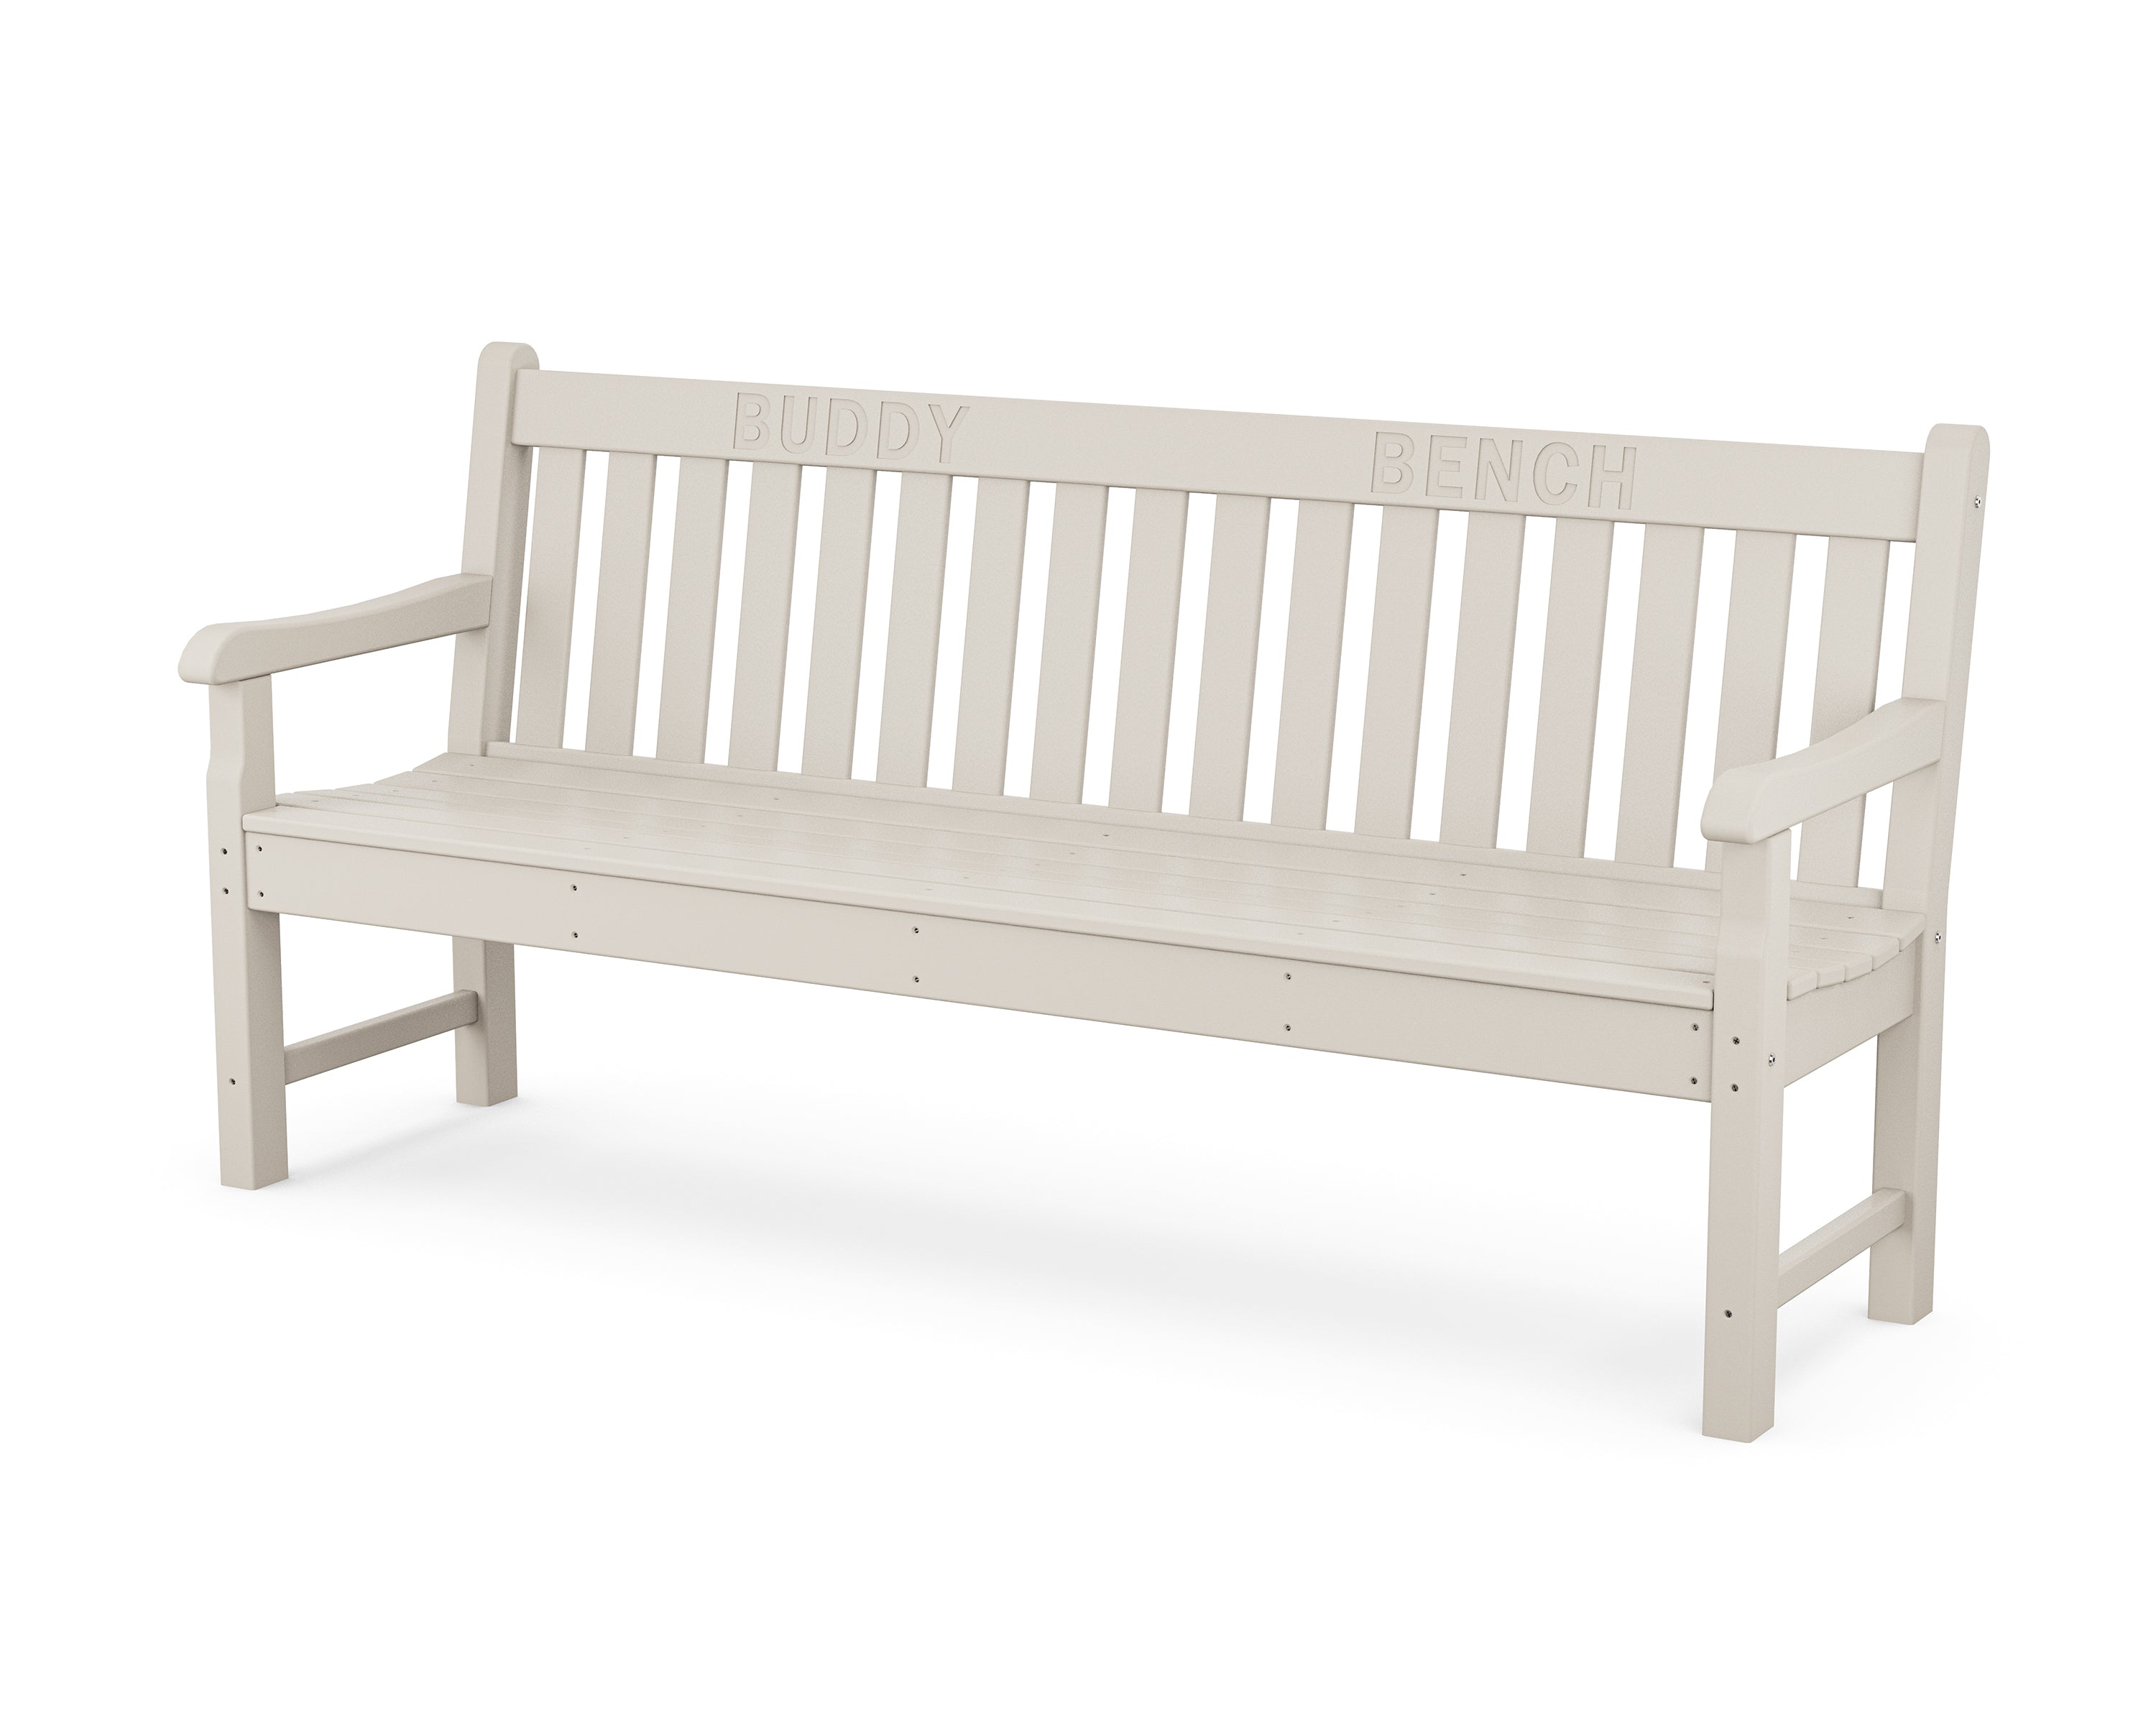 POLYWOOD® 72” Buddy Bench in Sand